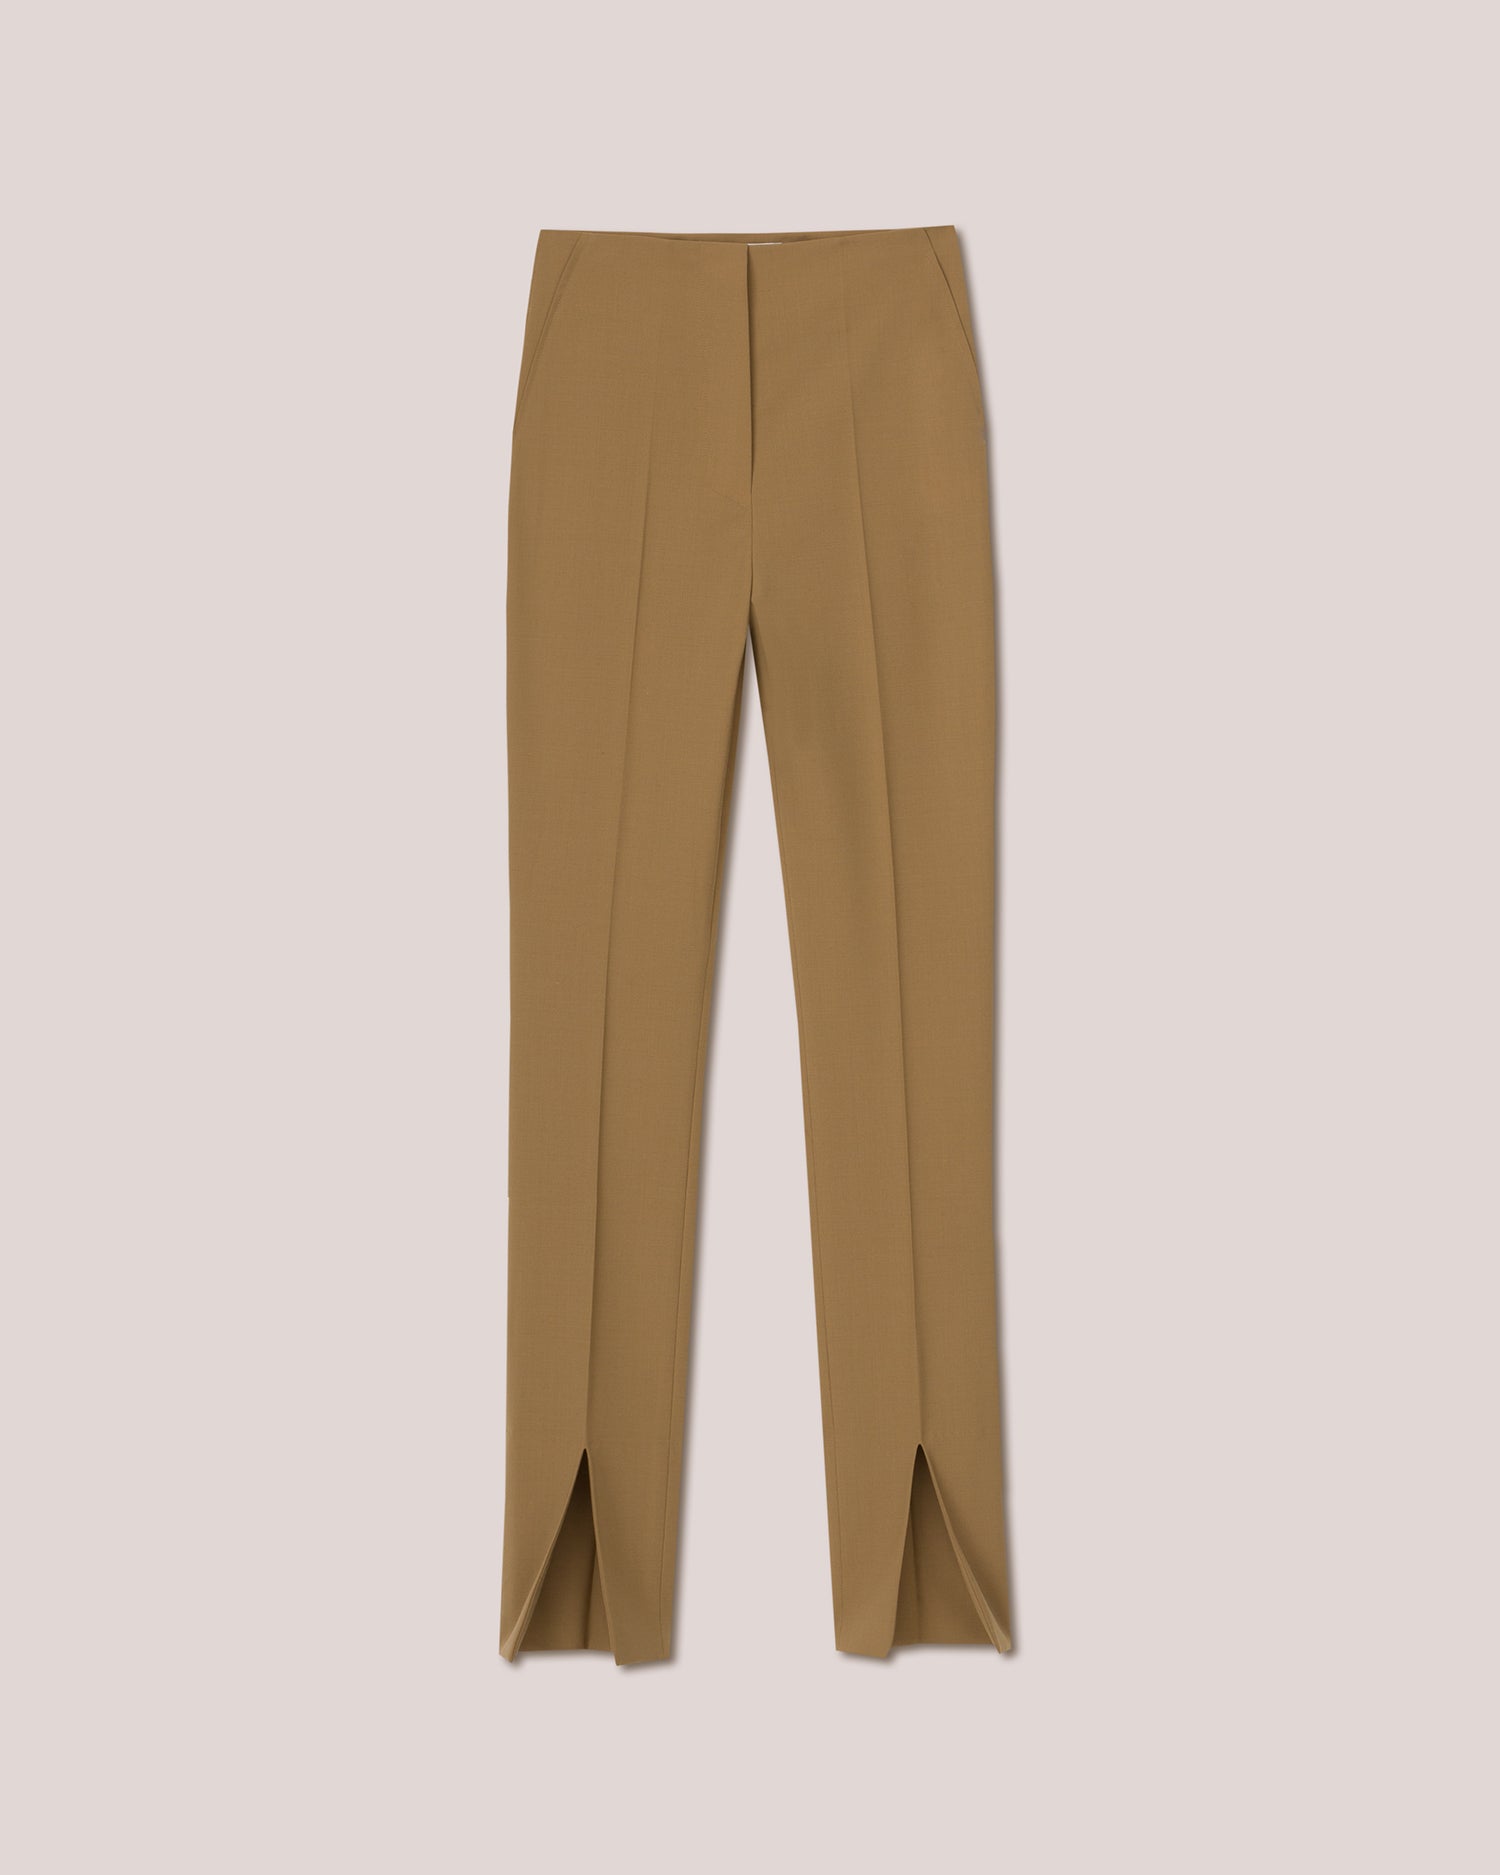 Bershka wide leg slouchy dad tailored trousers in camel | ASOS | Wide leg  pants outfit, Tailored pants, Camel pants outfit